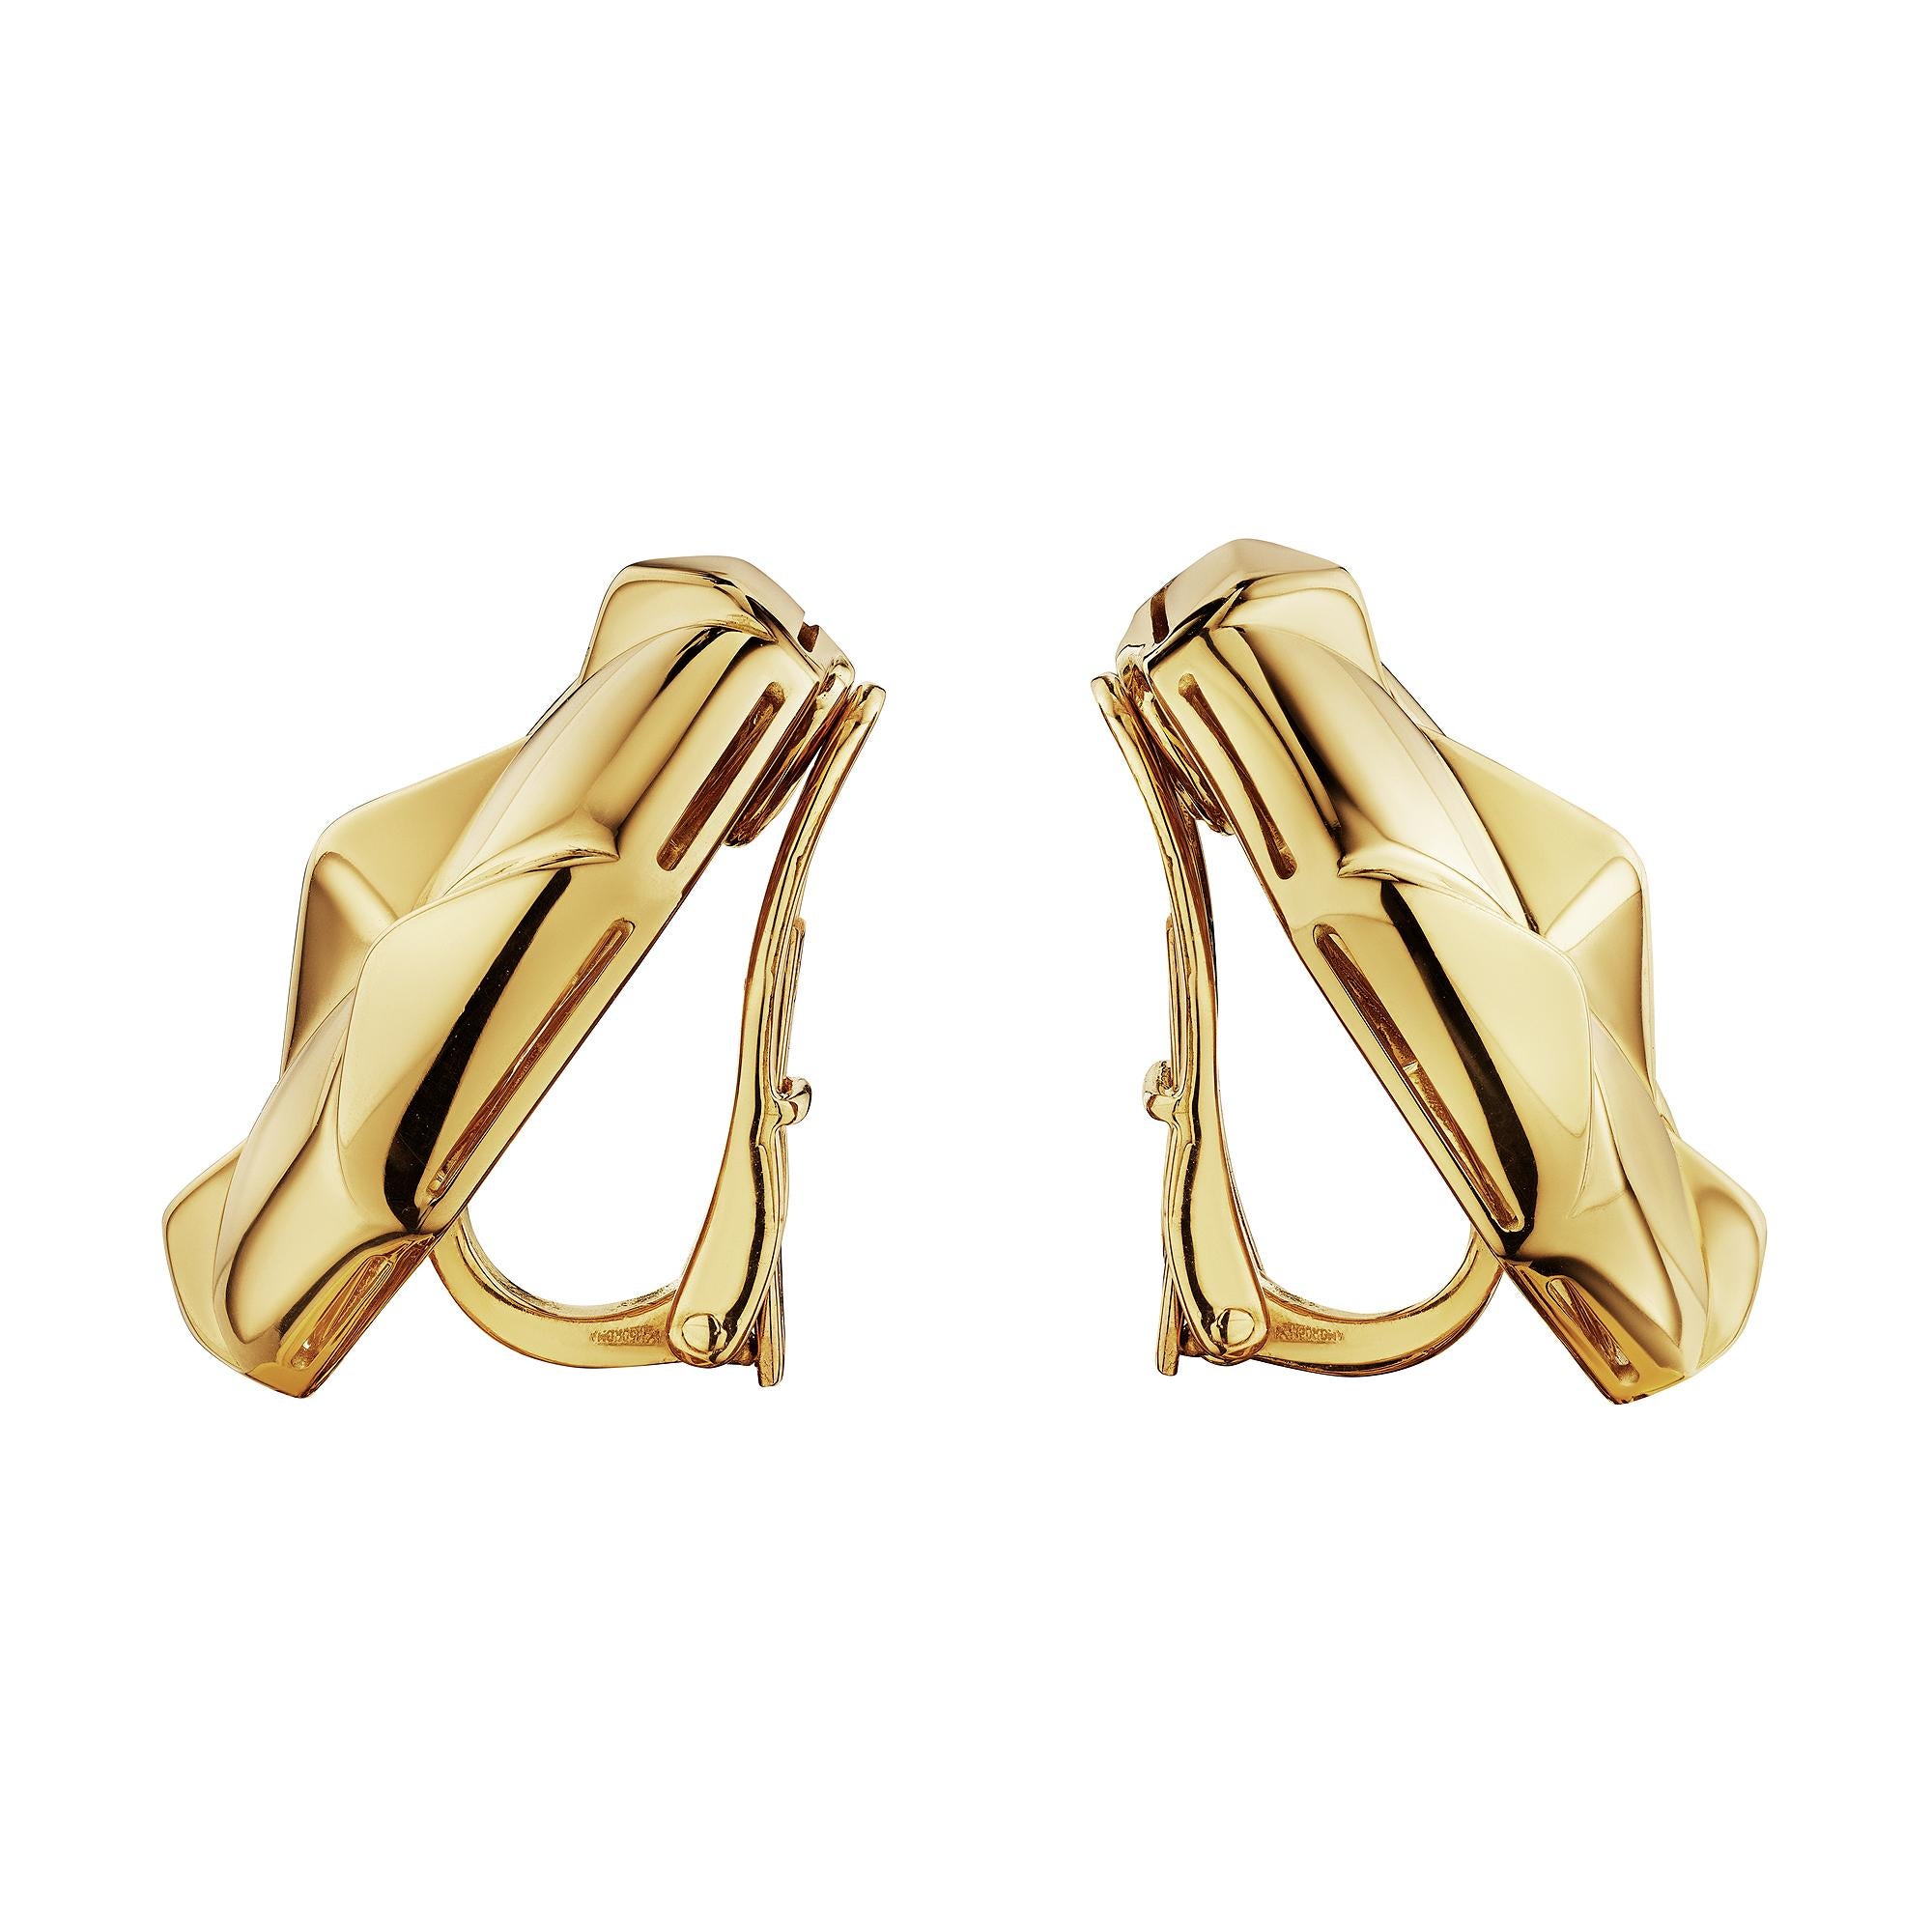 These iconic Bulgari modernist 18 karat yellow gold quilted button clip earrings are simply perfect.  With a polished surface that boldly reflects the light, these one-of-a-kind collectible earrings are the tailored accessory every wardrobe needs. 